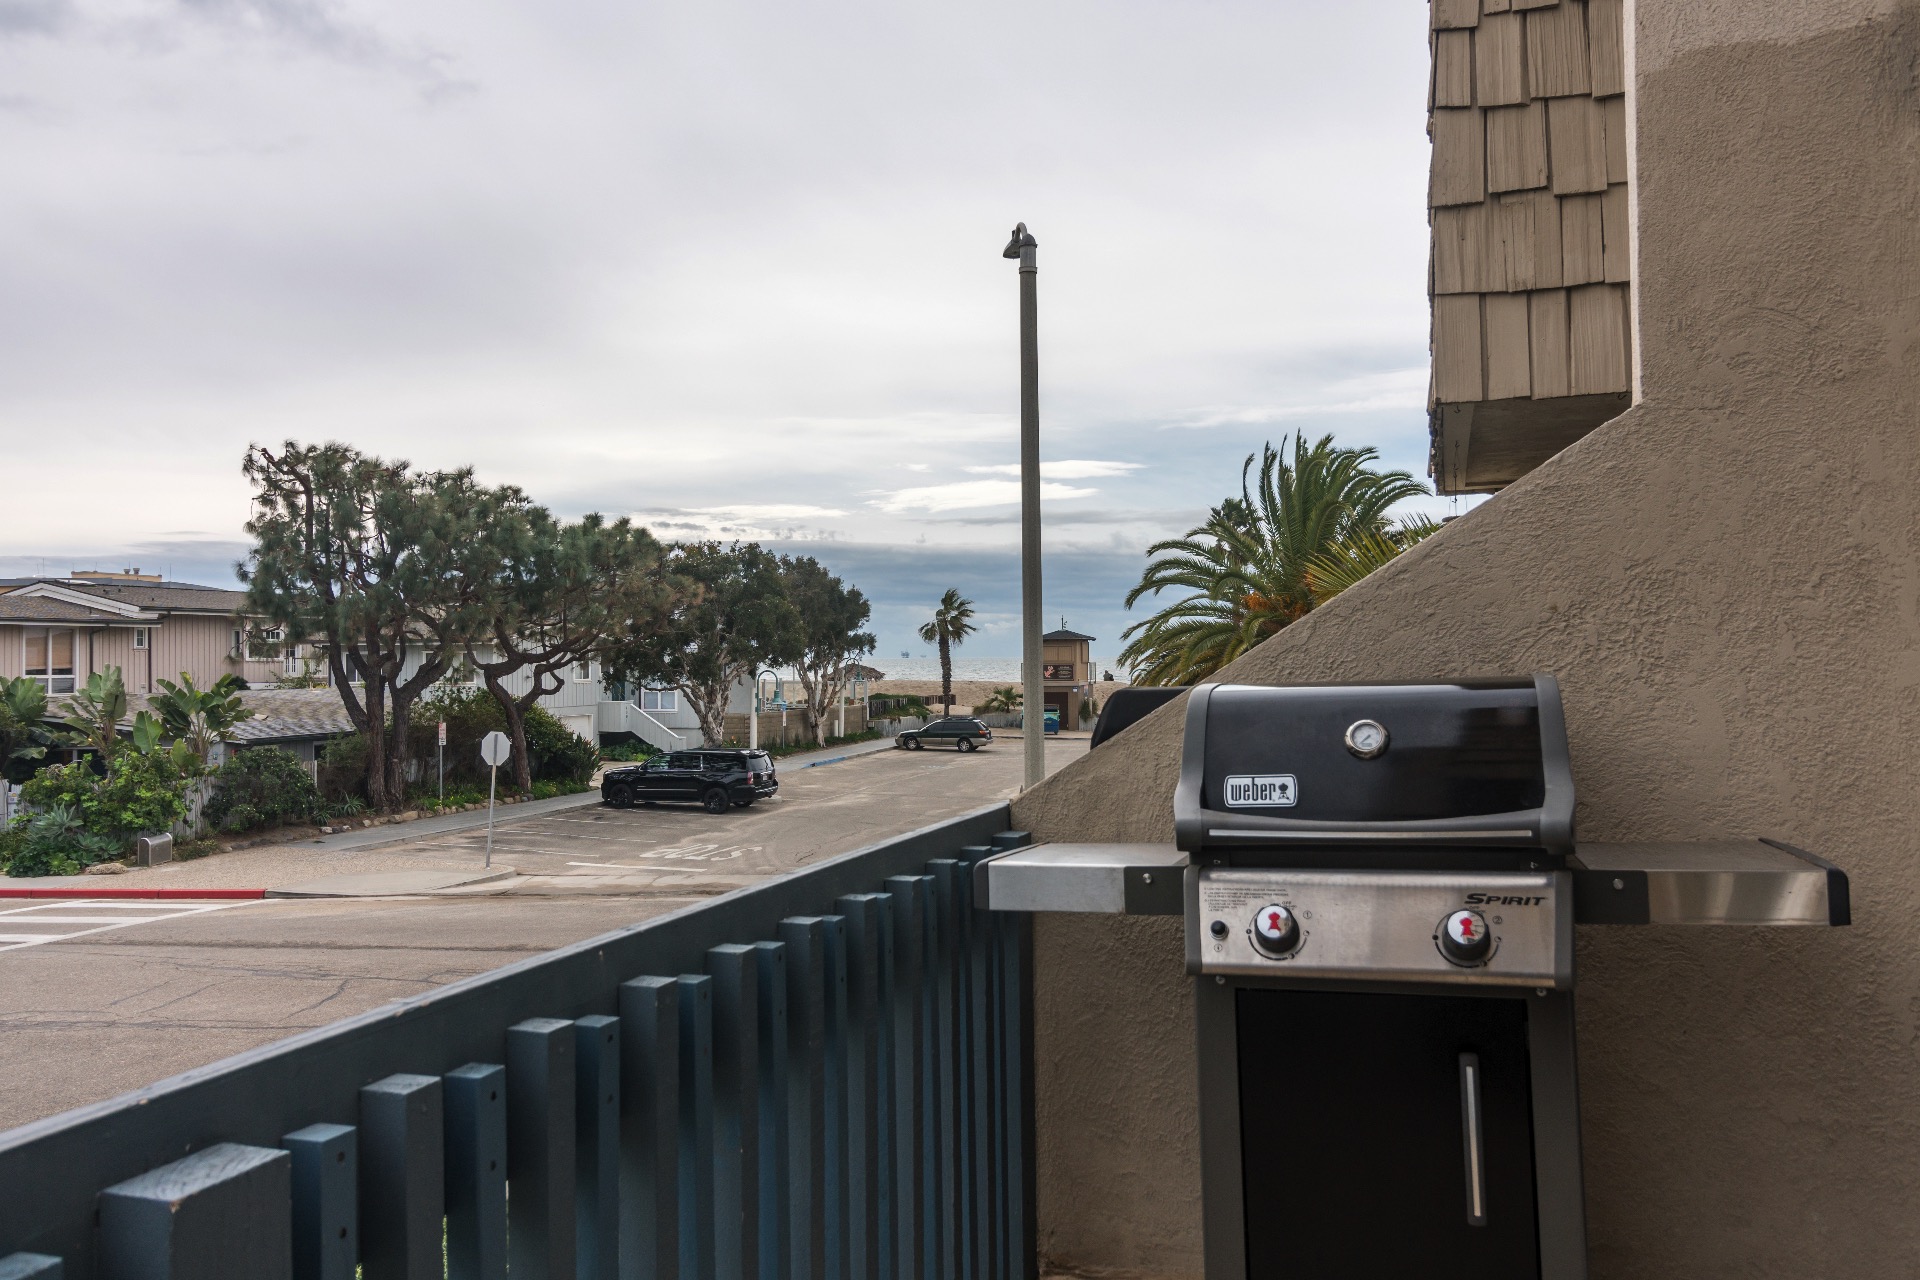 Gas grill, ocean views and ocean breezes from the balcony.